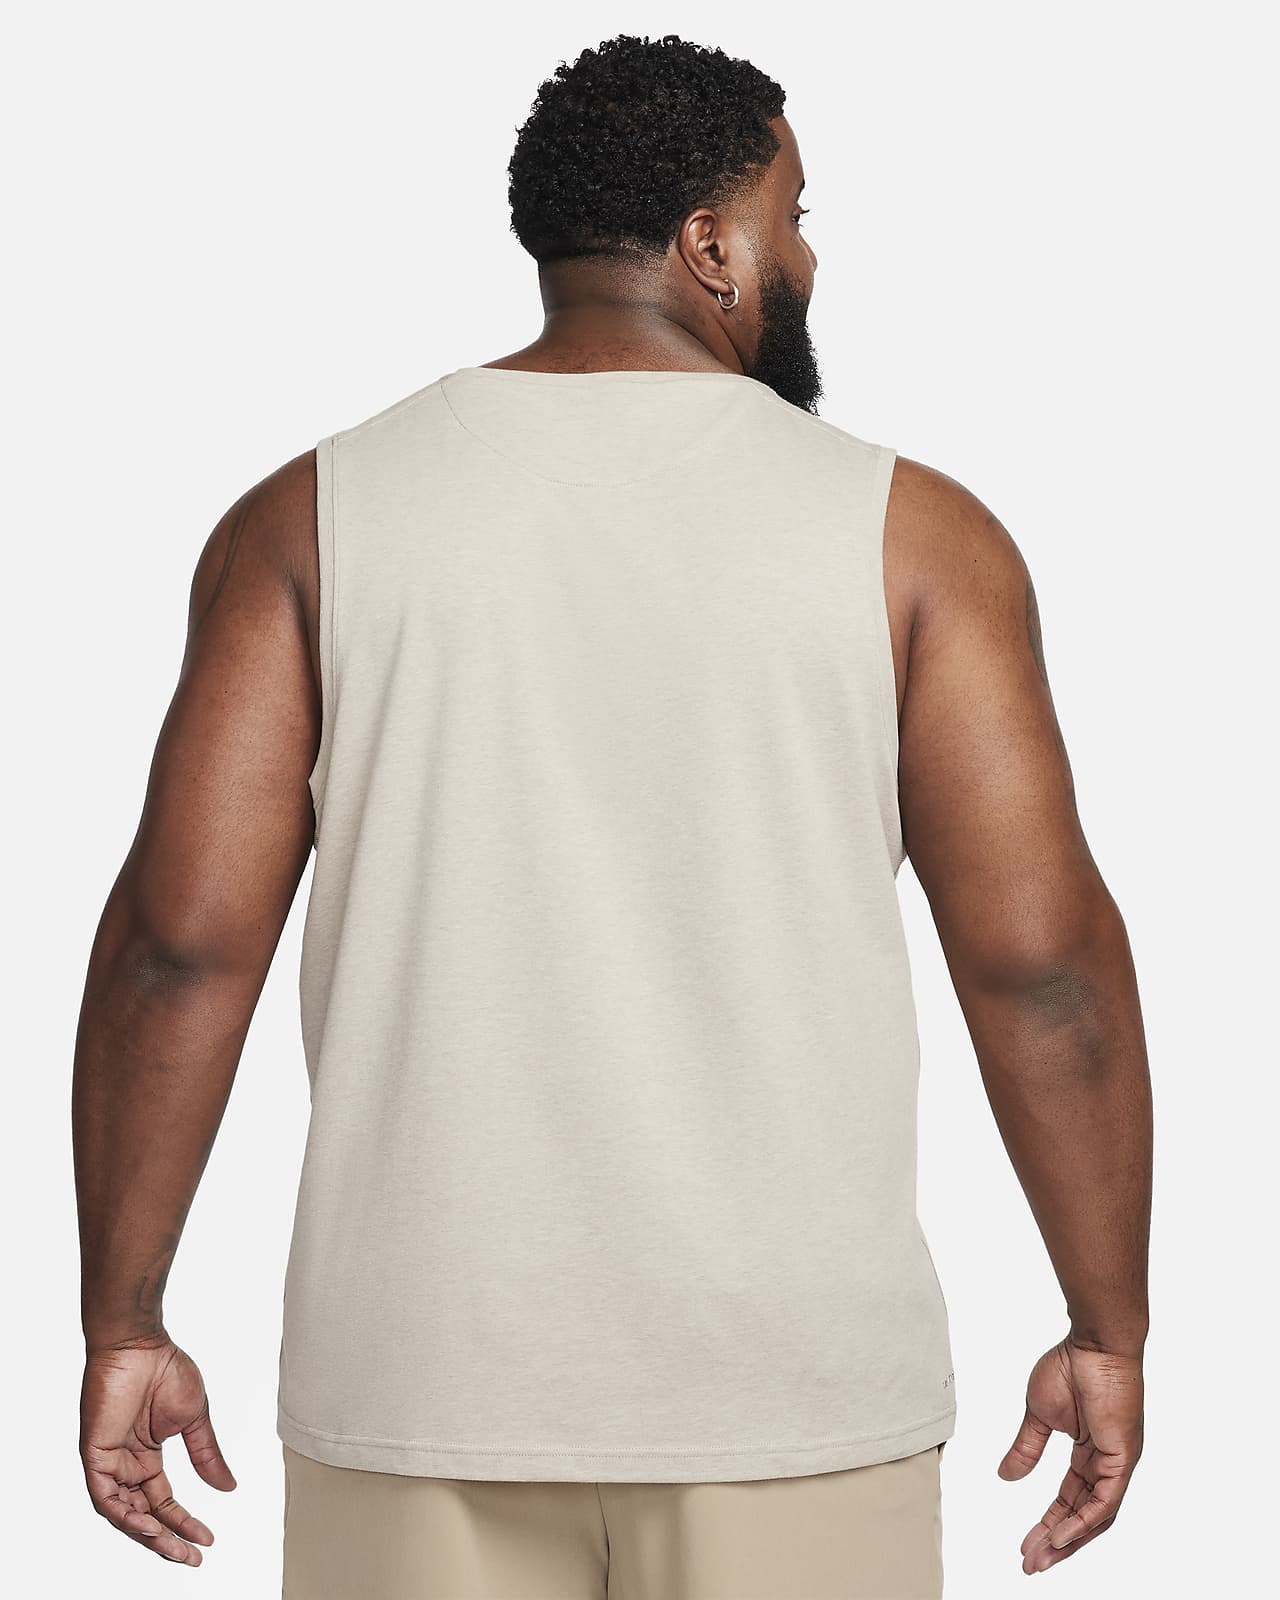 Tank Top Men Vest Graphic Fitness Muscle Sleeveless Workout Fit Athletic T  Shirt